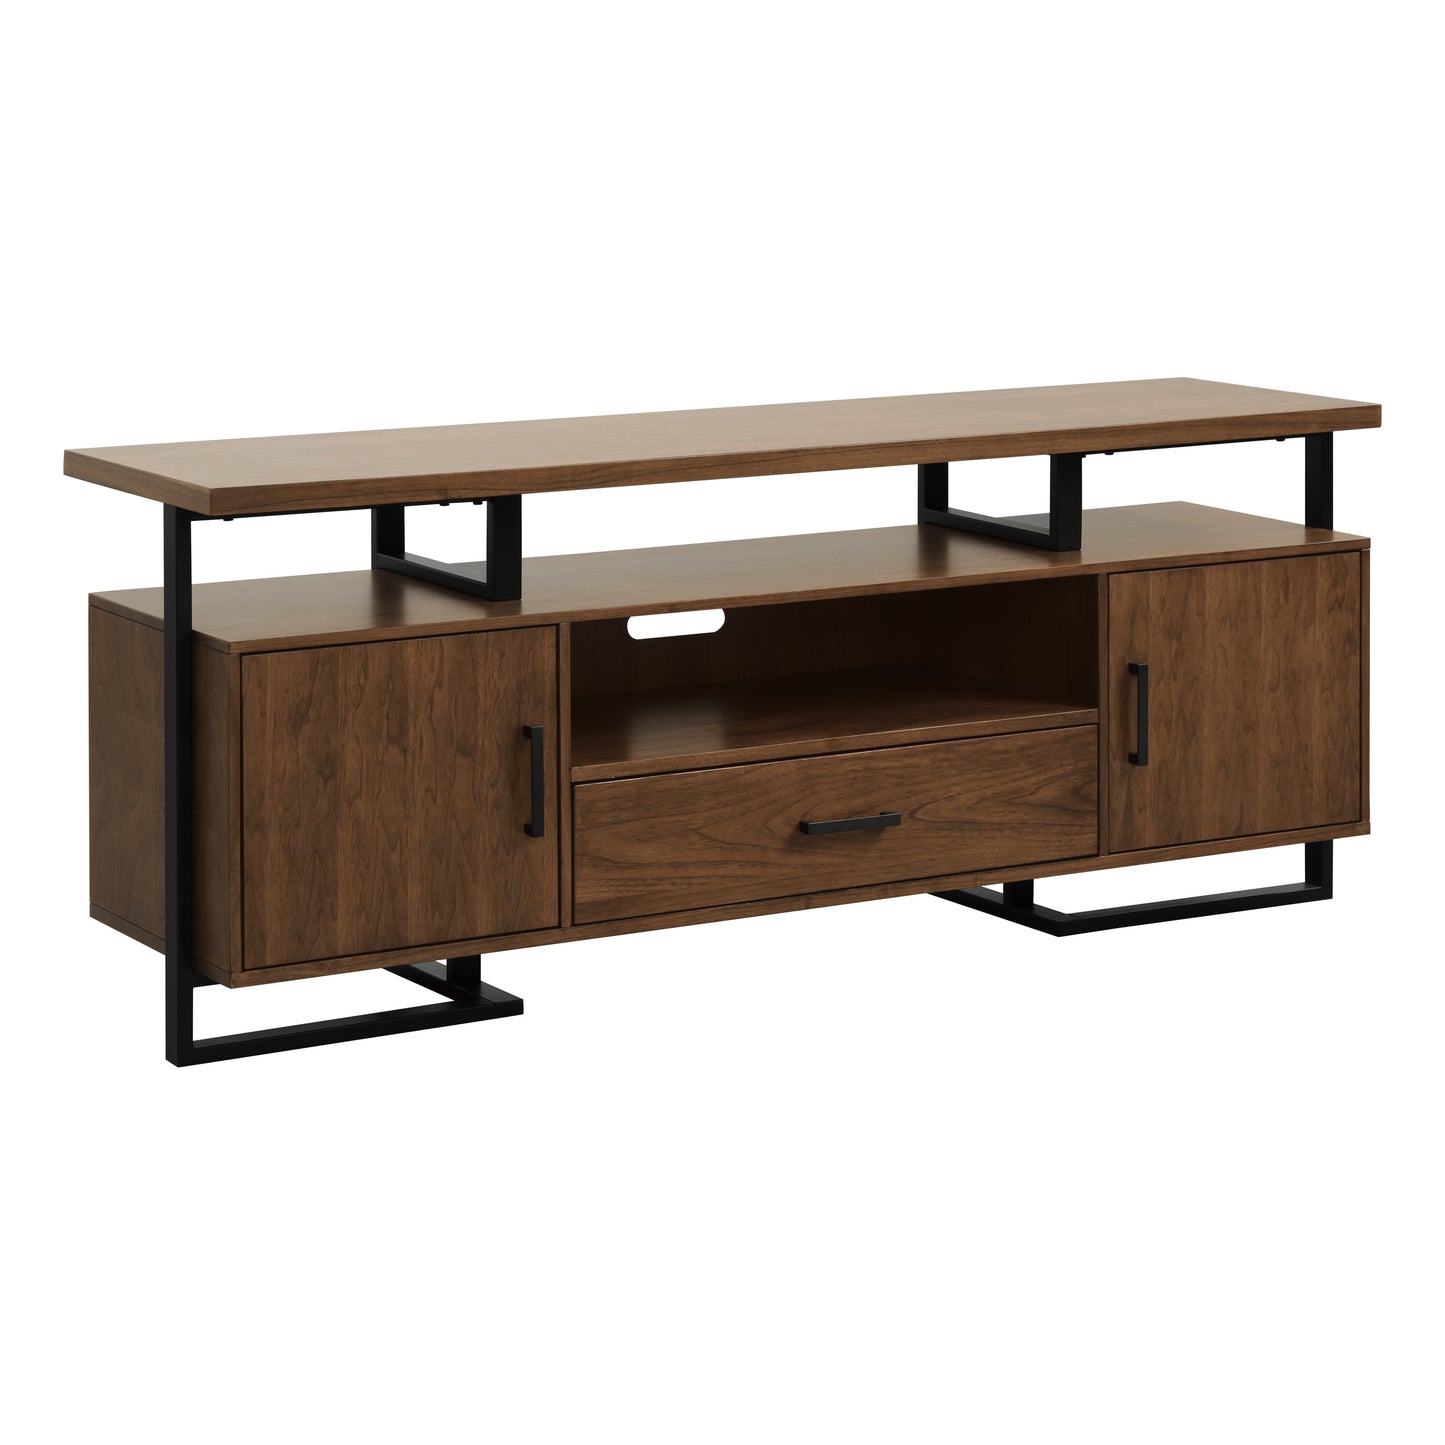 Sedley 68" TV Stand ONE COLOR ONLY